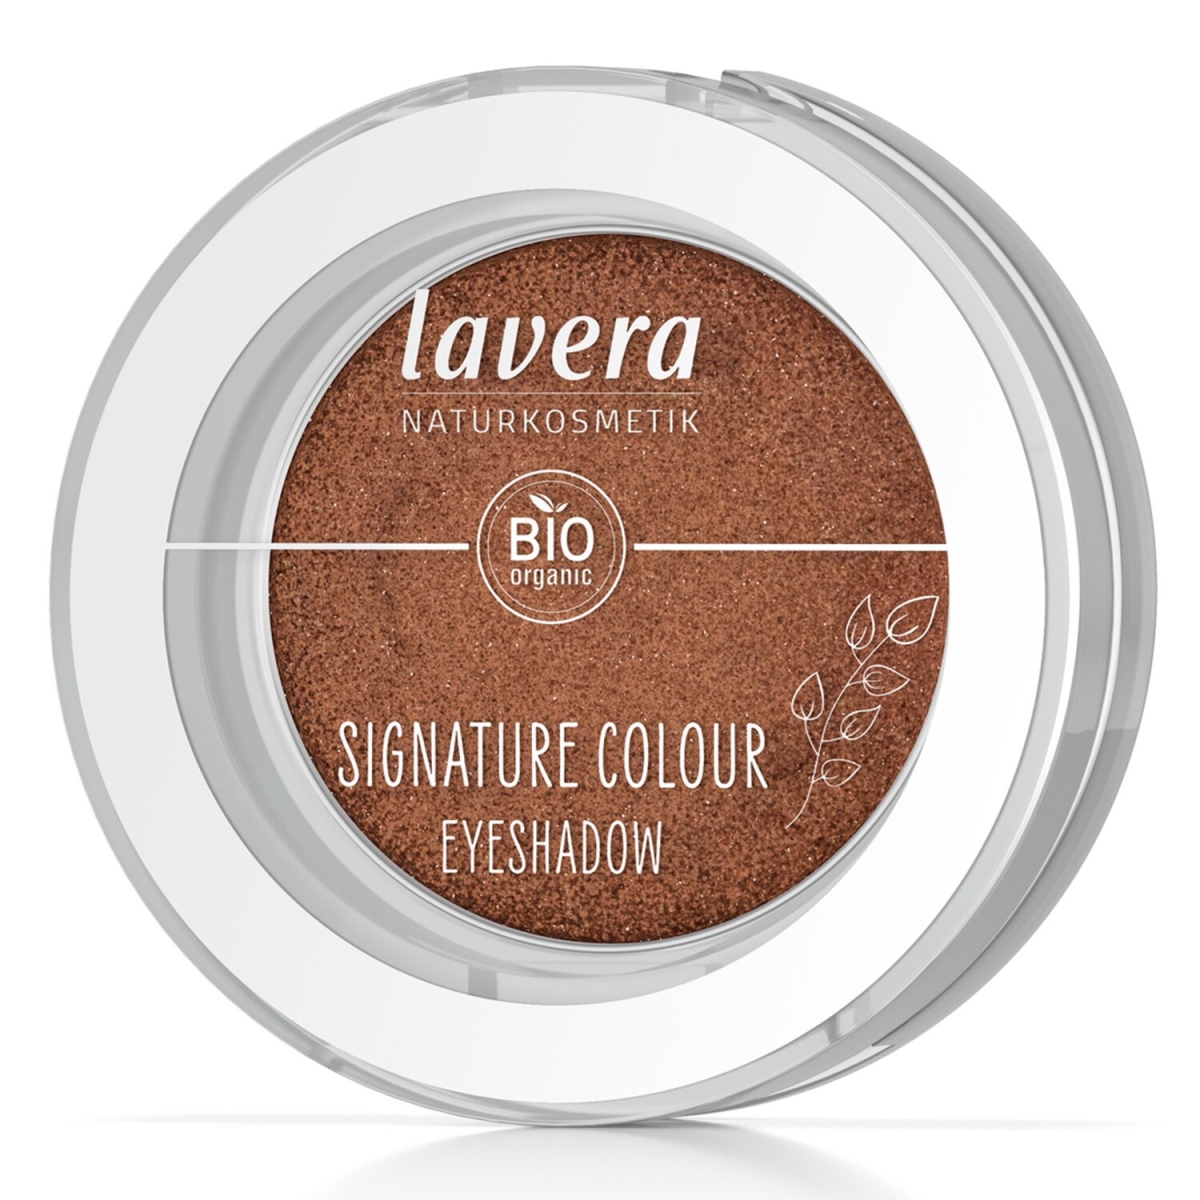 Picture of Lavera 284795 2 g Signature Color Eyeshadow - No.07 Amber